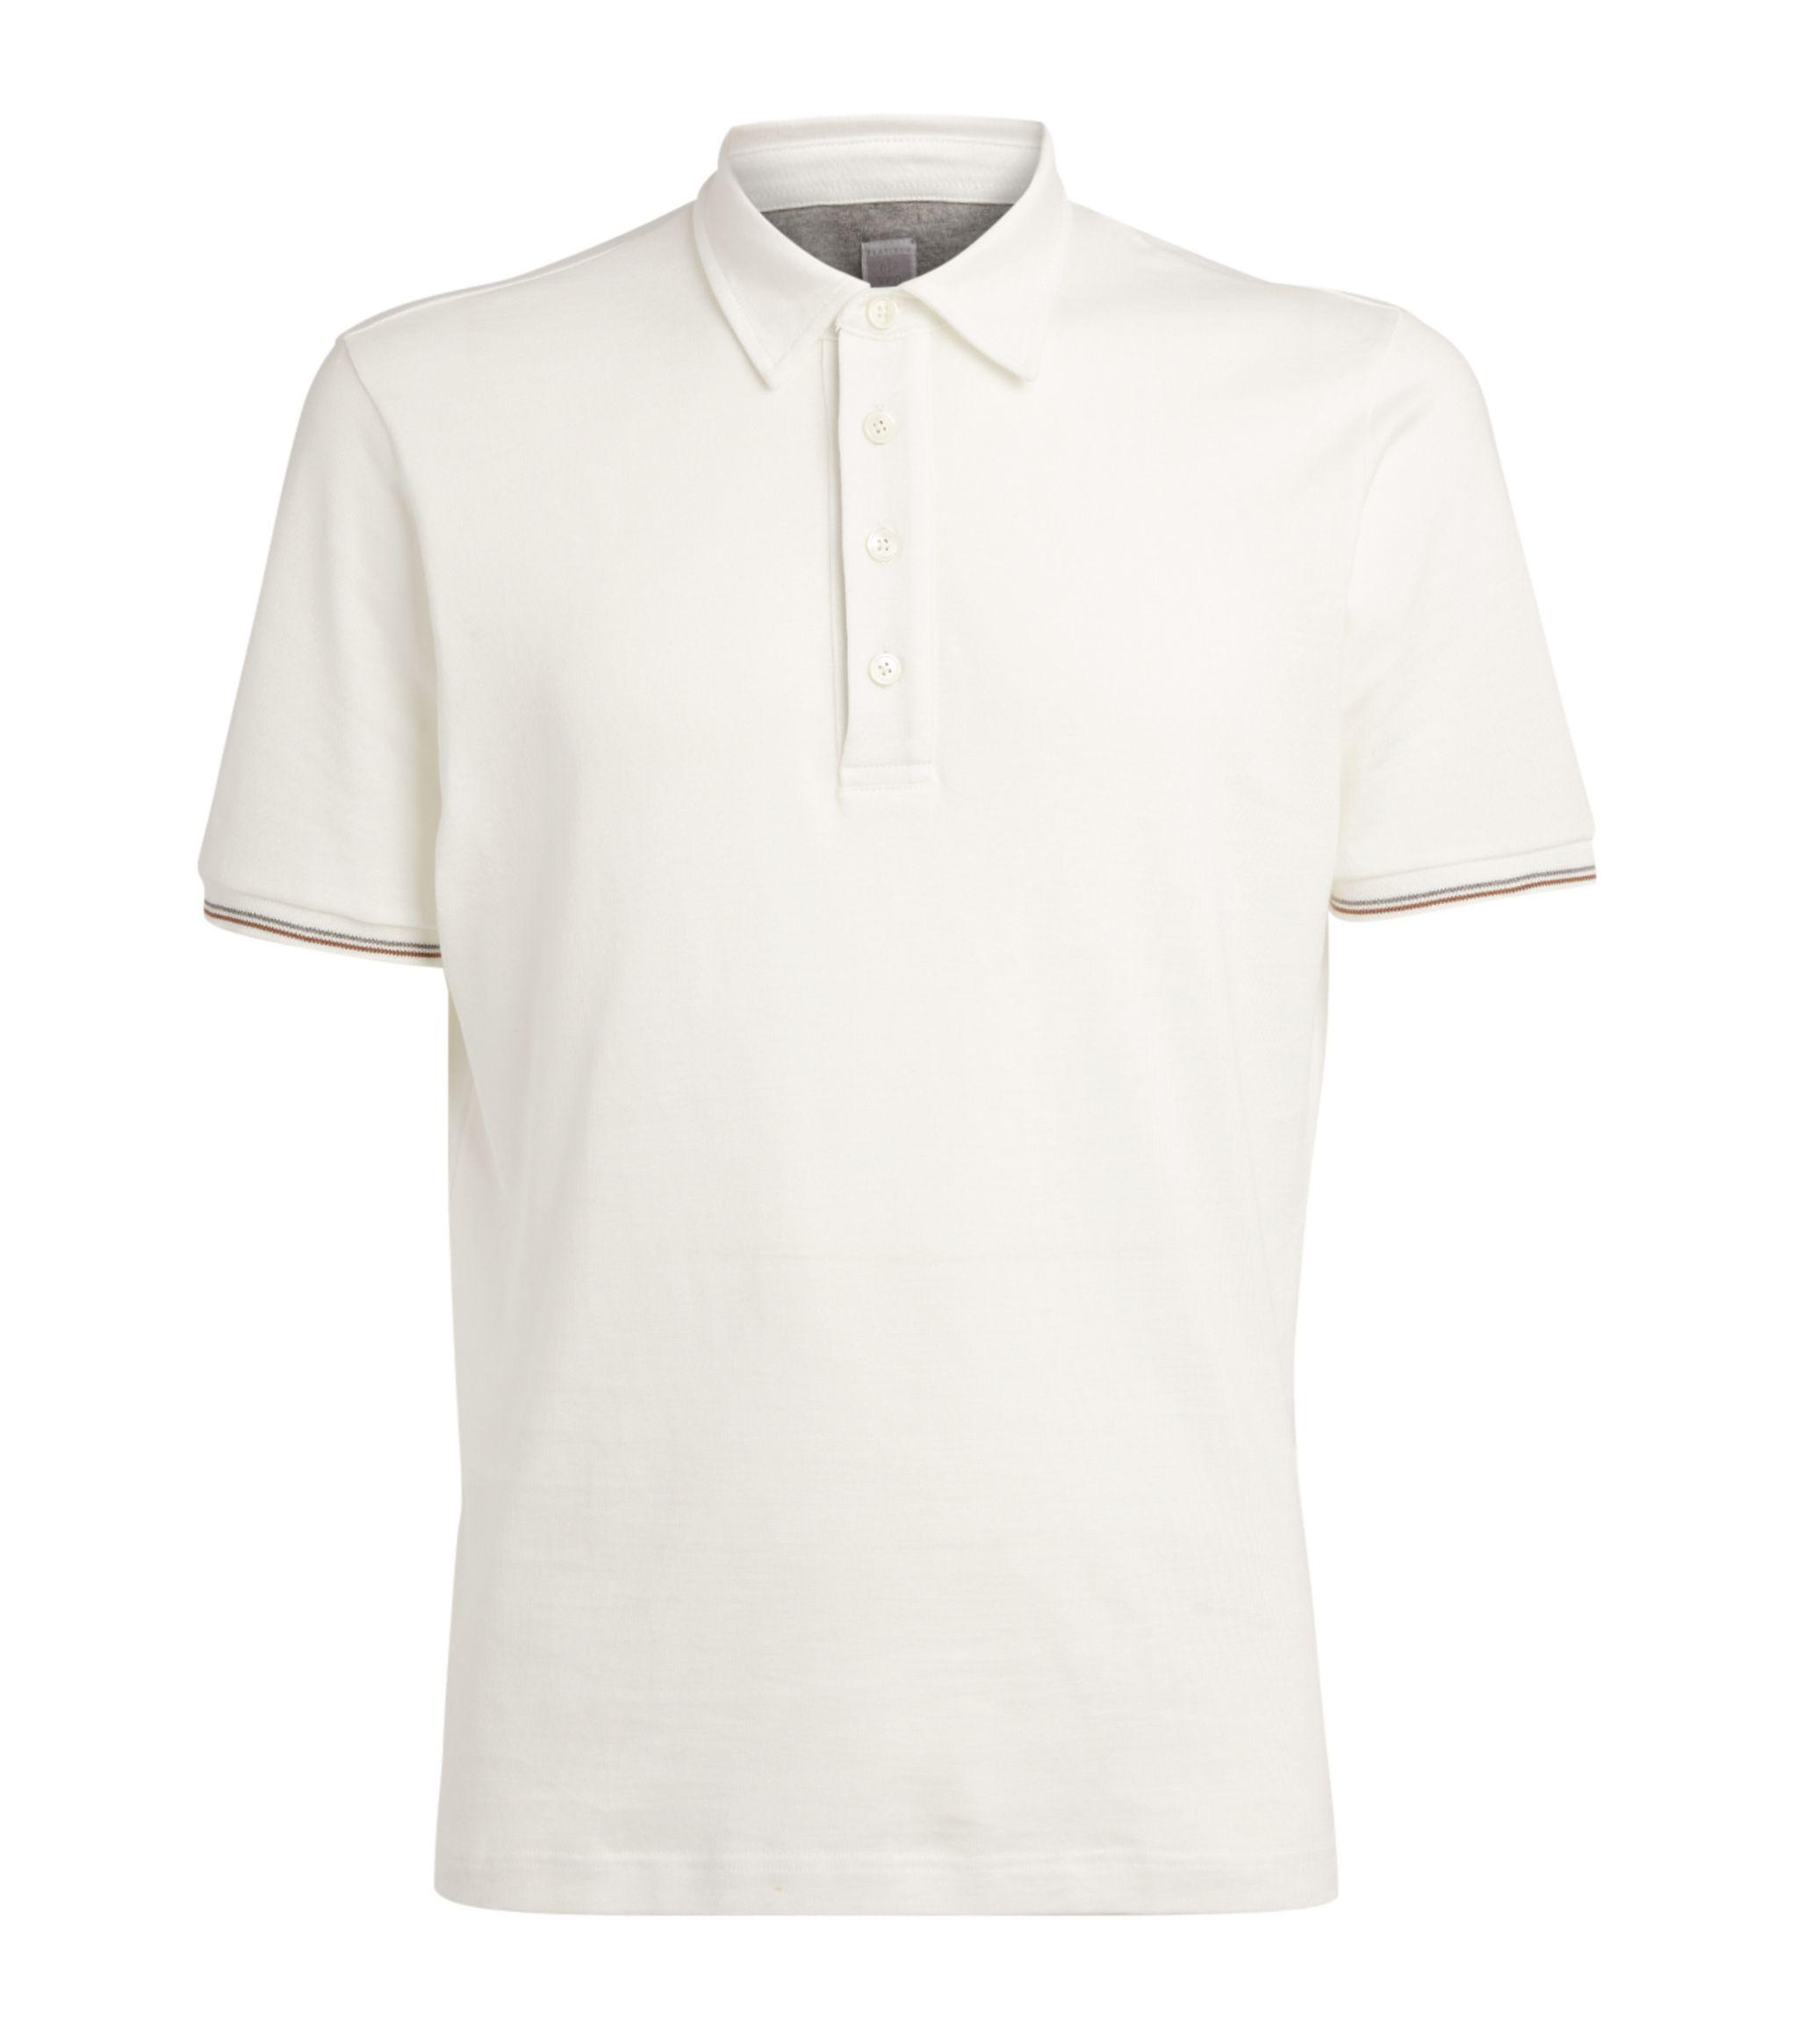 Eleventy Cotton Polo Shirt in White for Men - Lyst